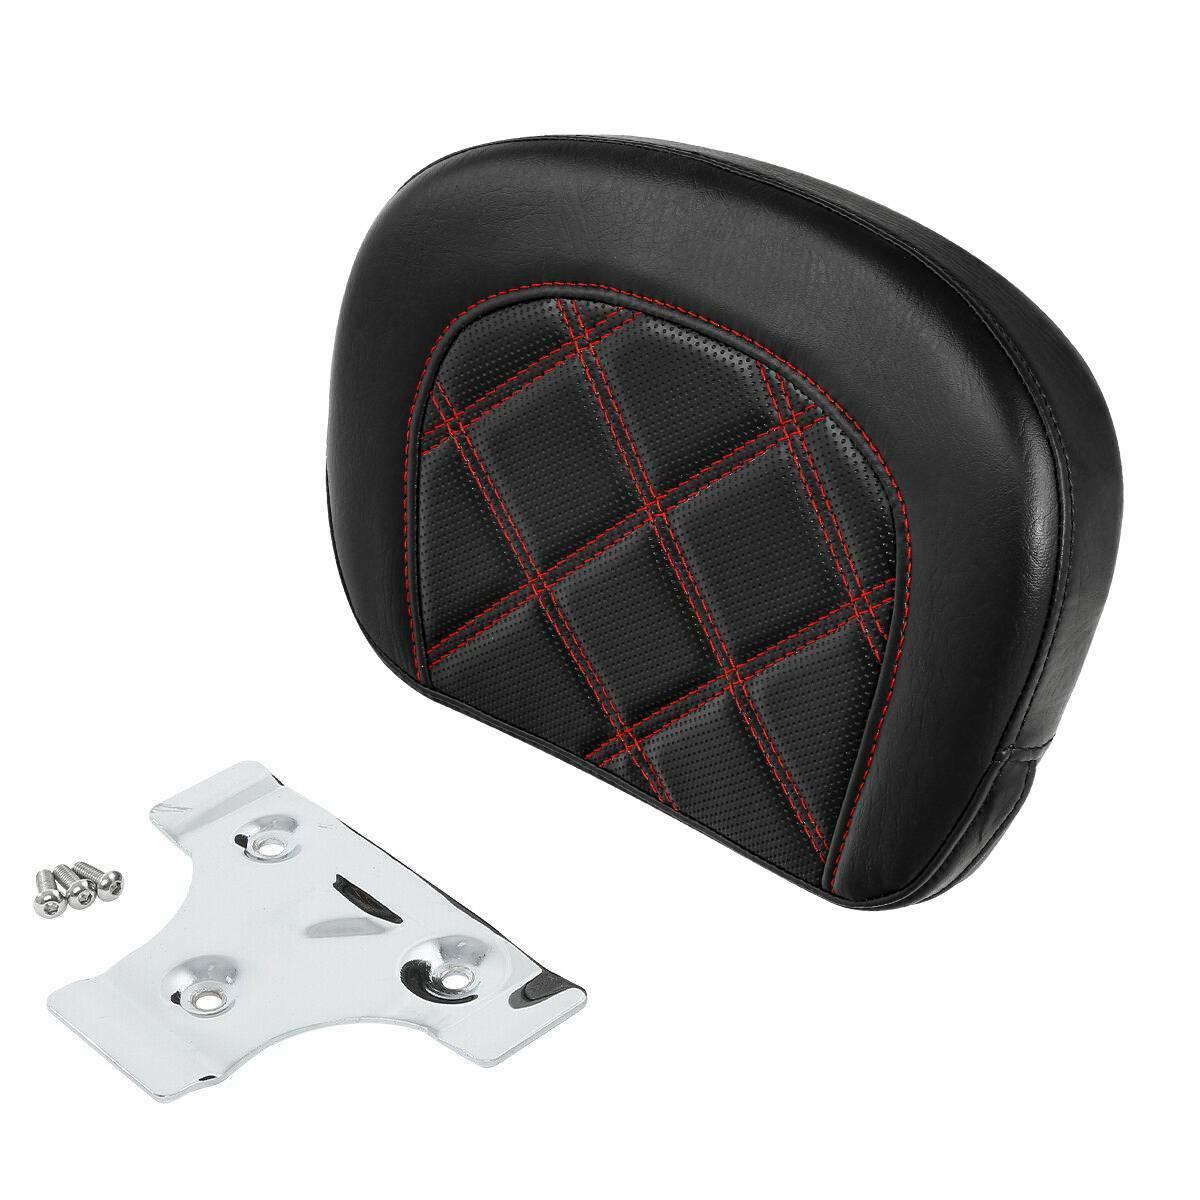 Passenger Sissy Bar Backrest Pad Fit For Harley Touring Street Road Glide 94-22 - Moto Life Products